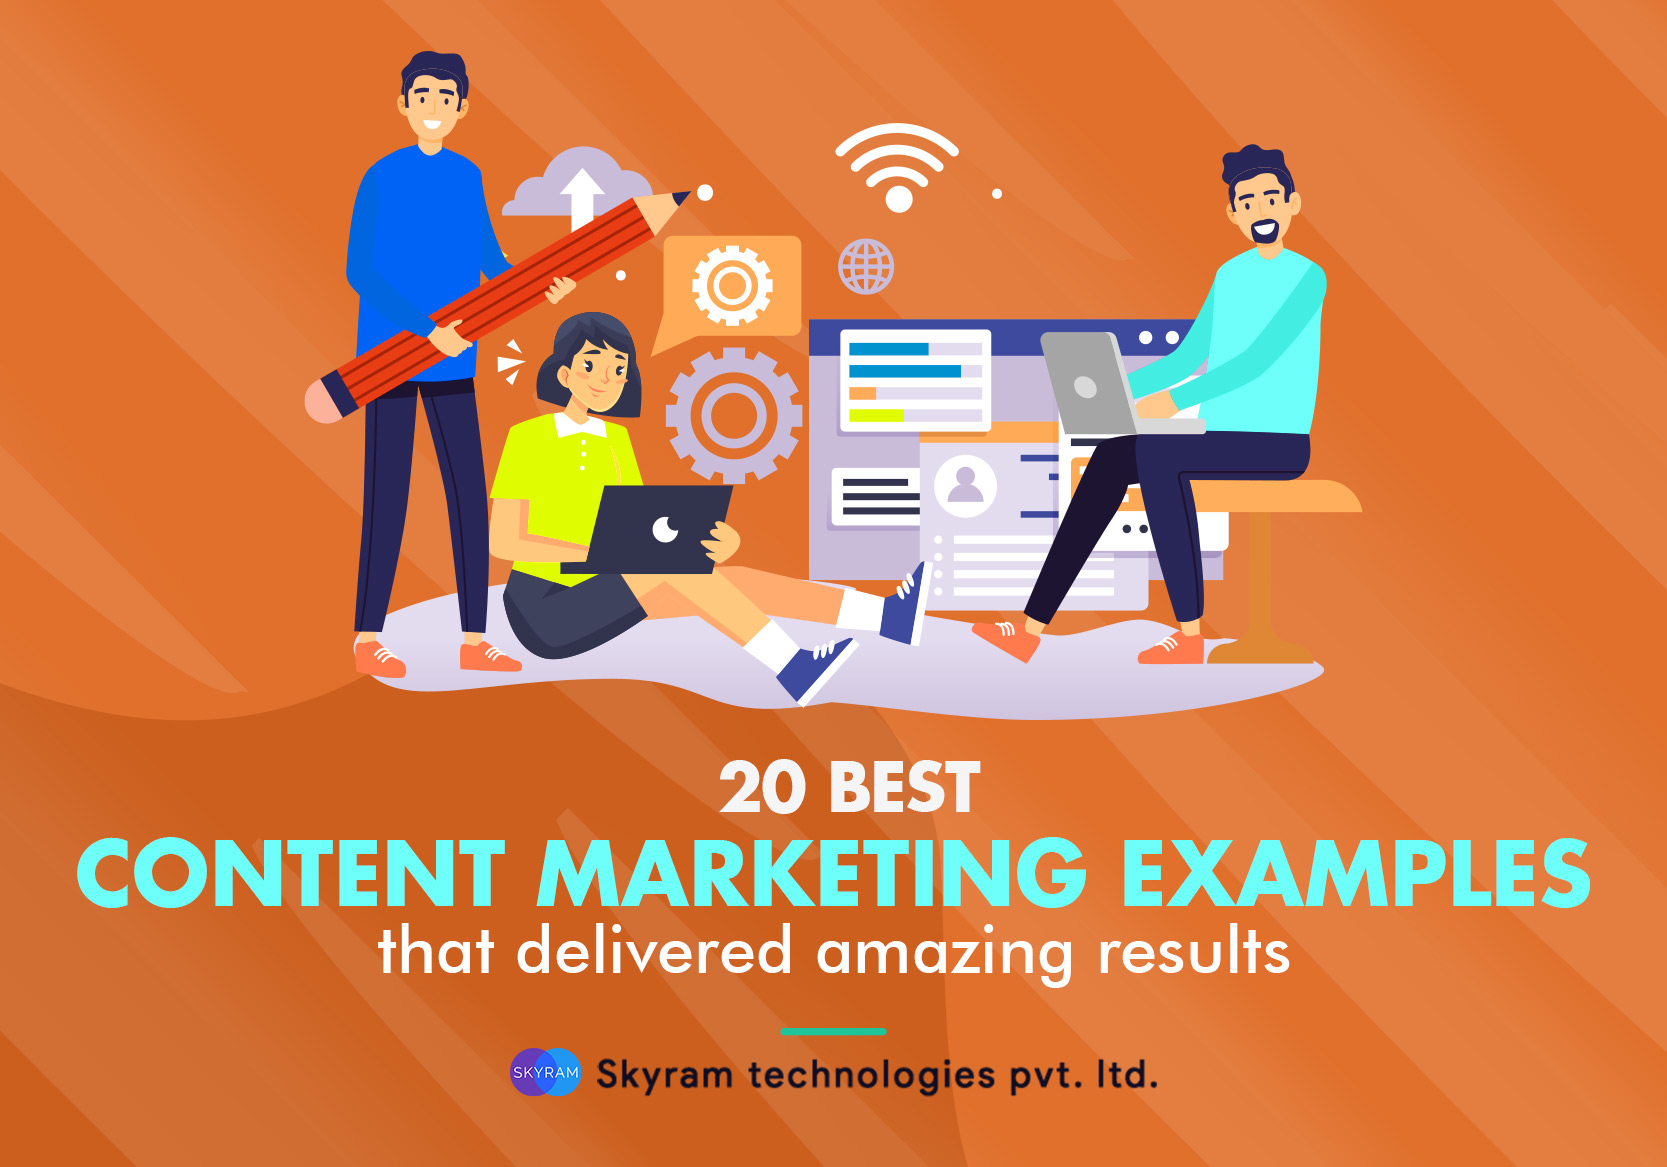 20 best Content Marketing examples that delivered amazing results